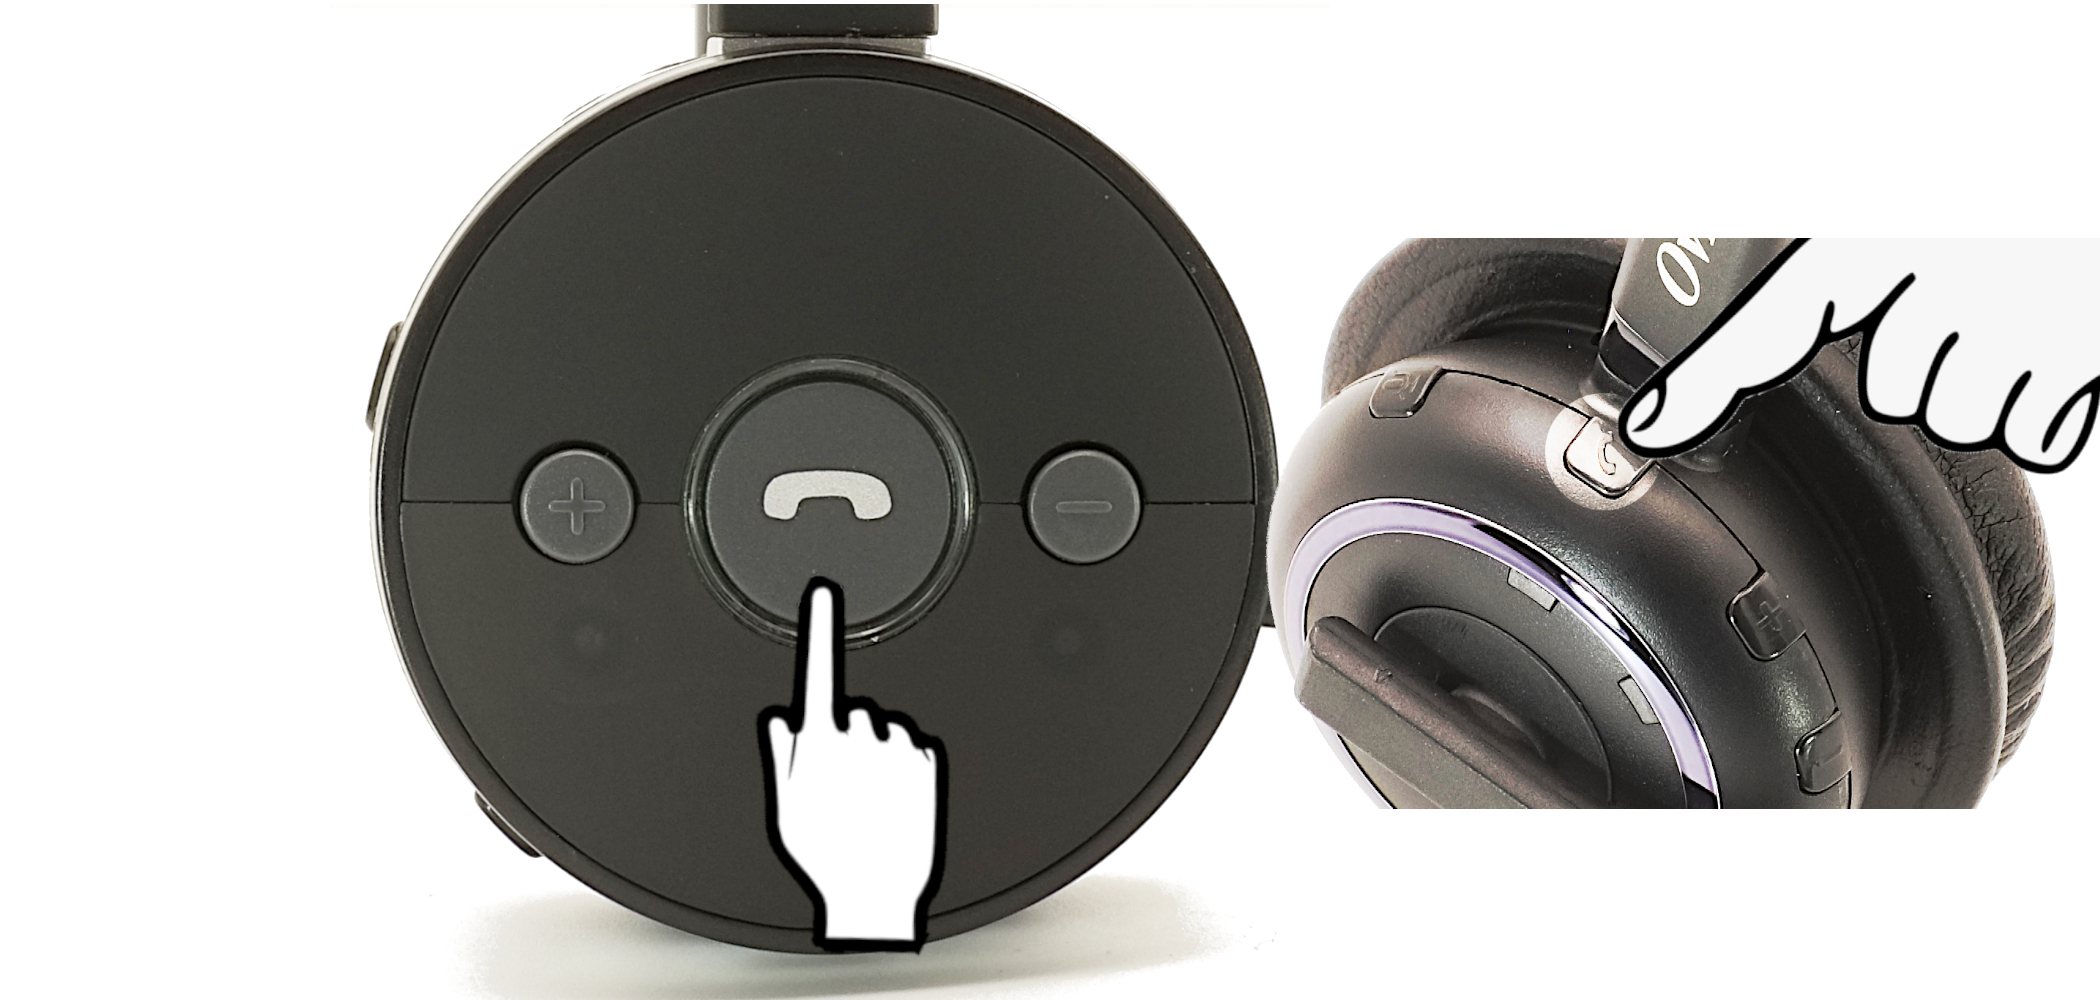 OvisLink wireless headset button to answer calls